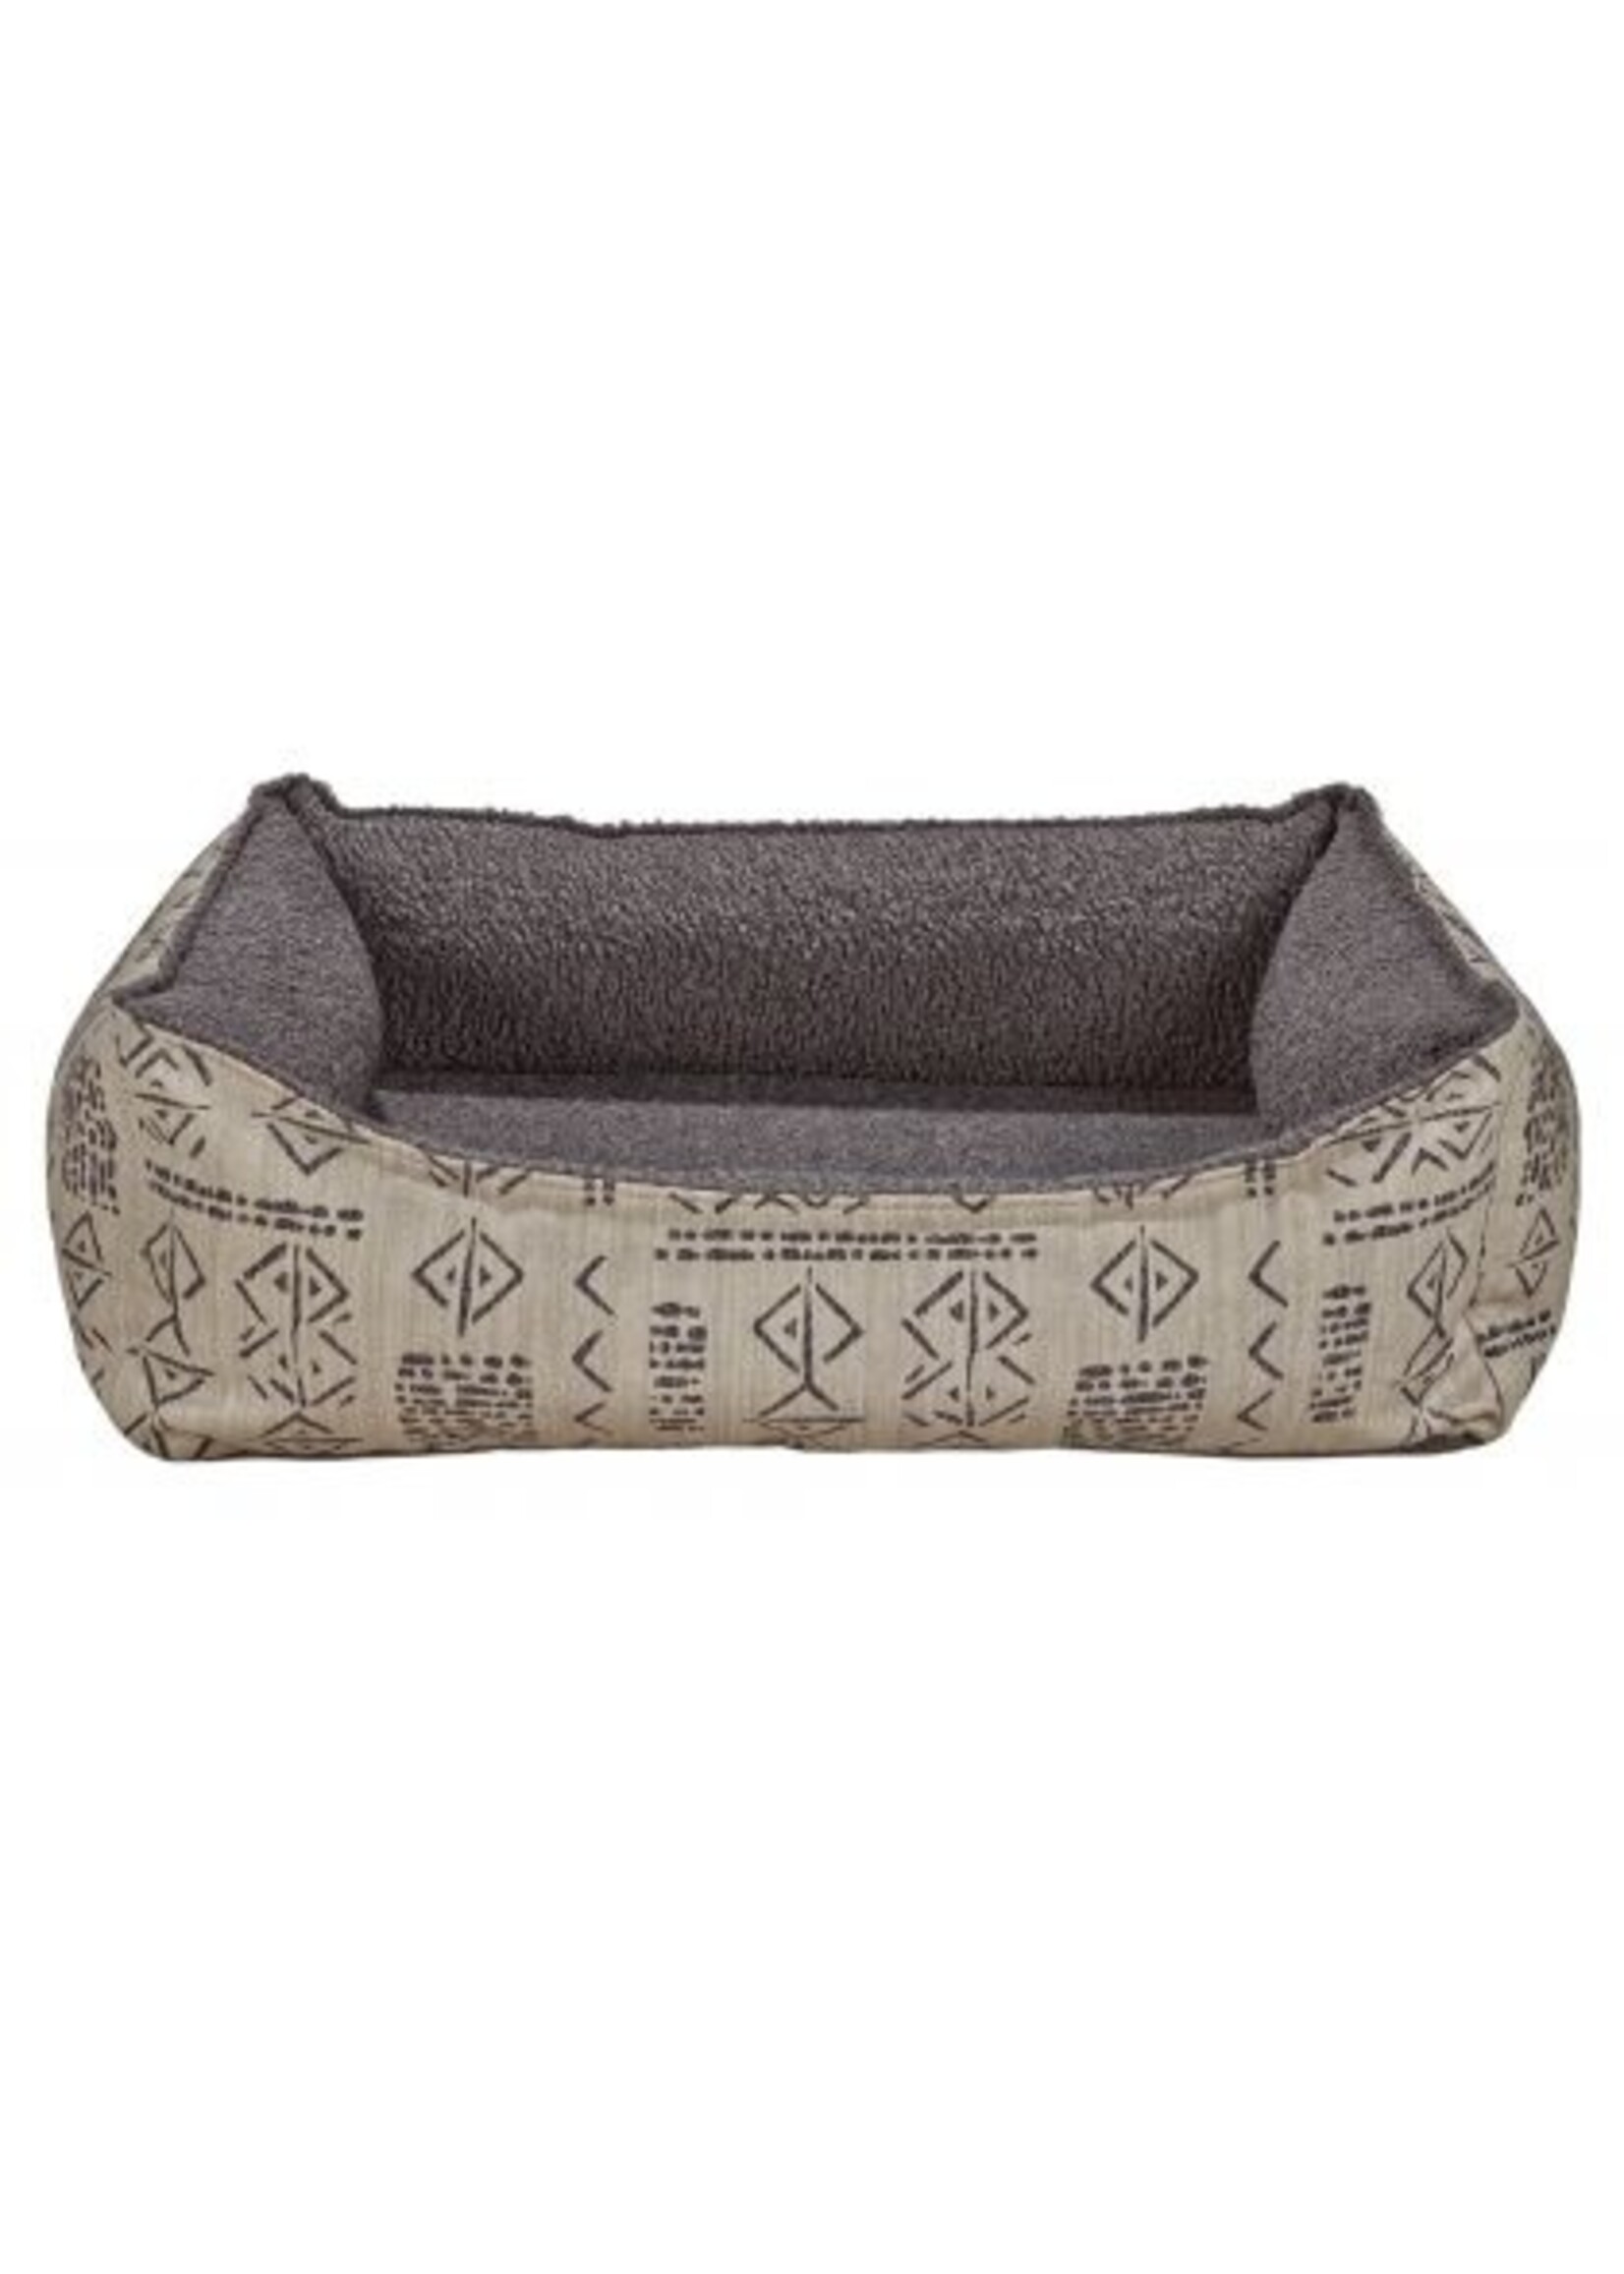 Bowsers Pet Products Bowsers Pet Oslo Ortho Bed Performance Linen & Woven